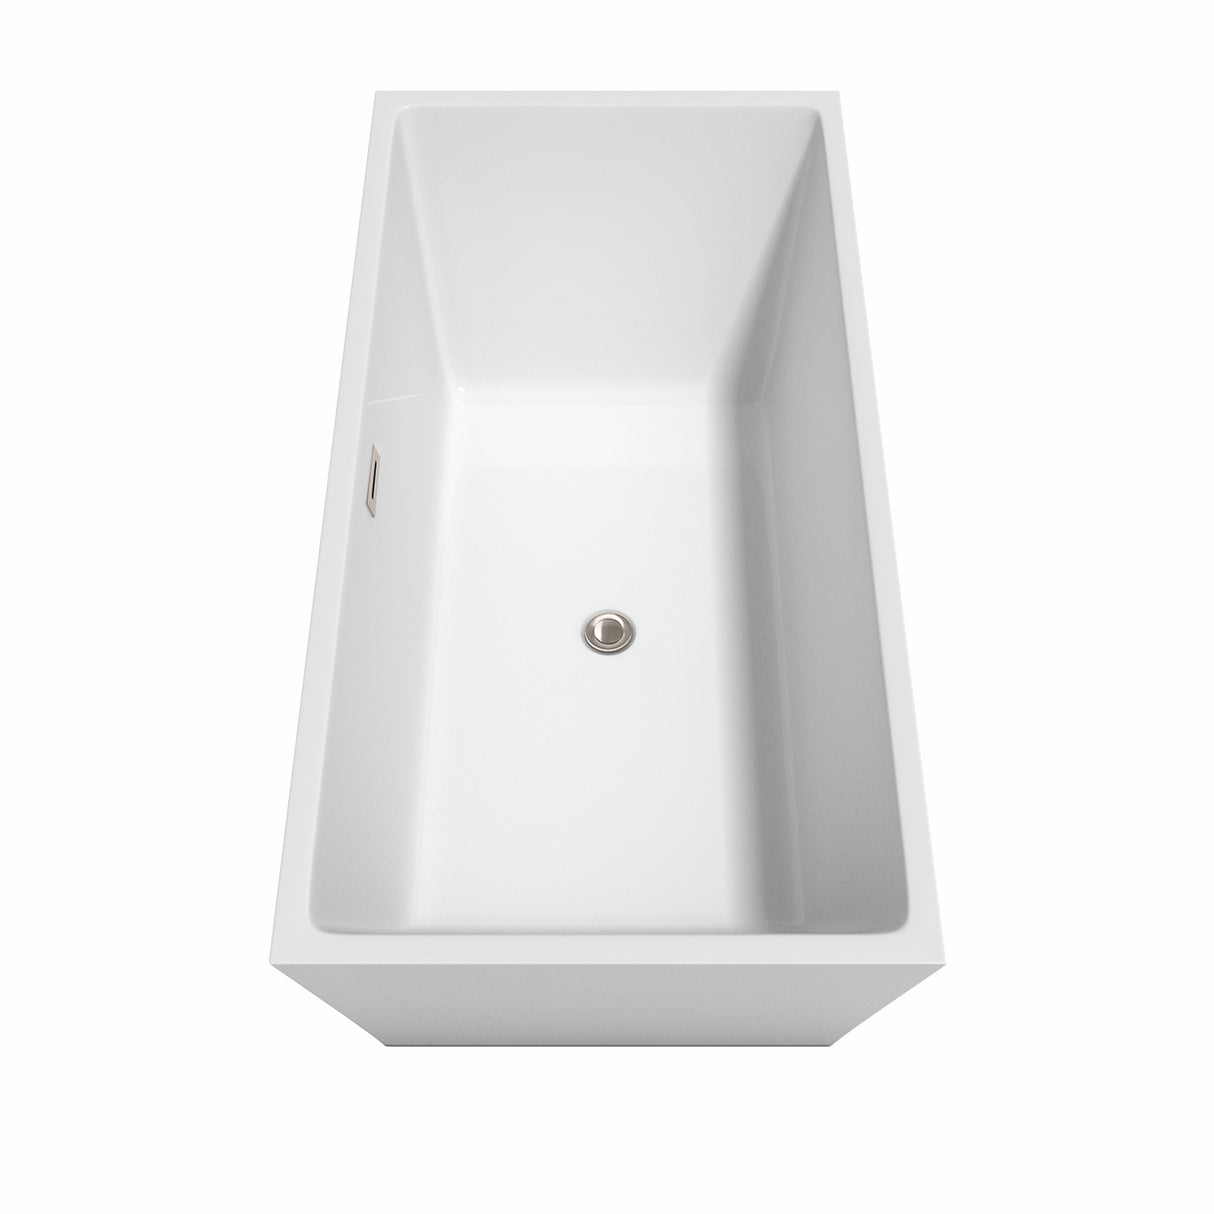 Sara 63 Inch Freestanding Bathtub in White with Brushed Nickel Drain and Overflow Trim